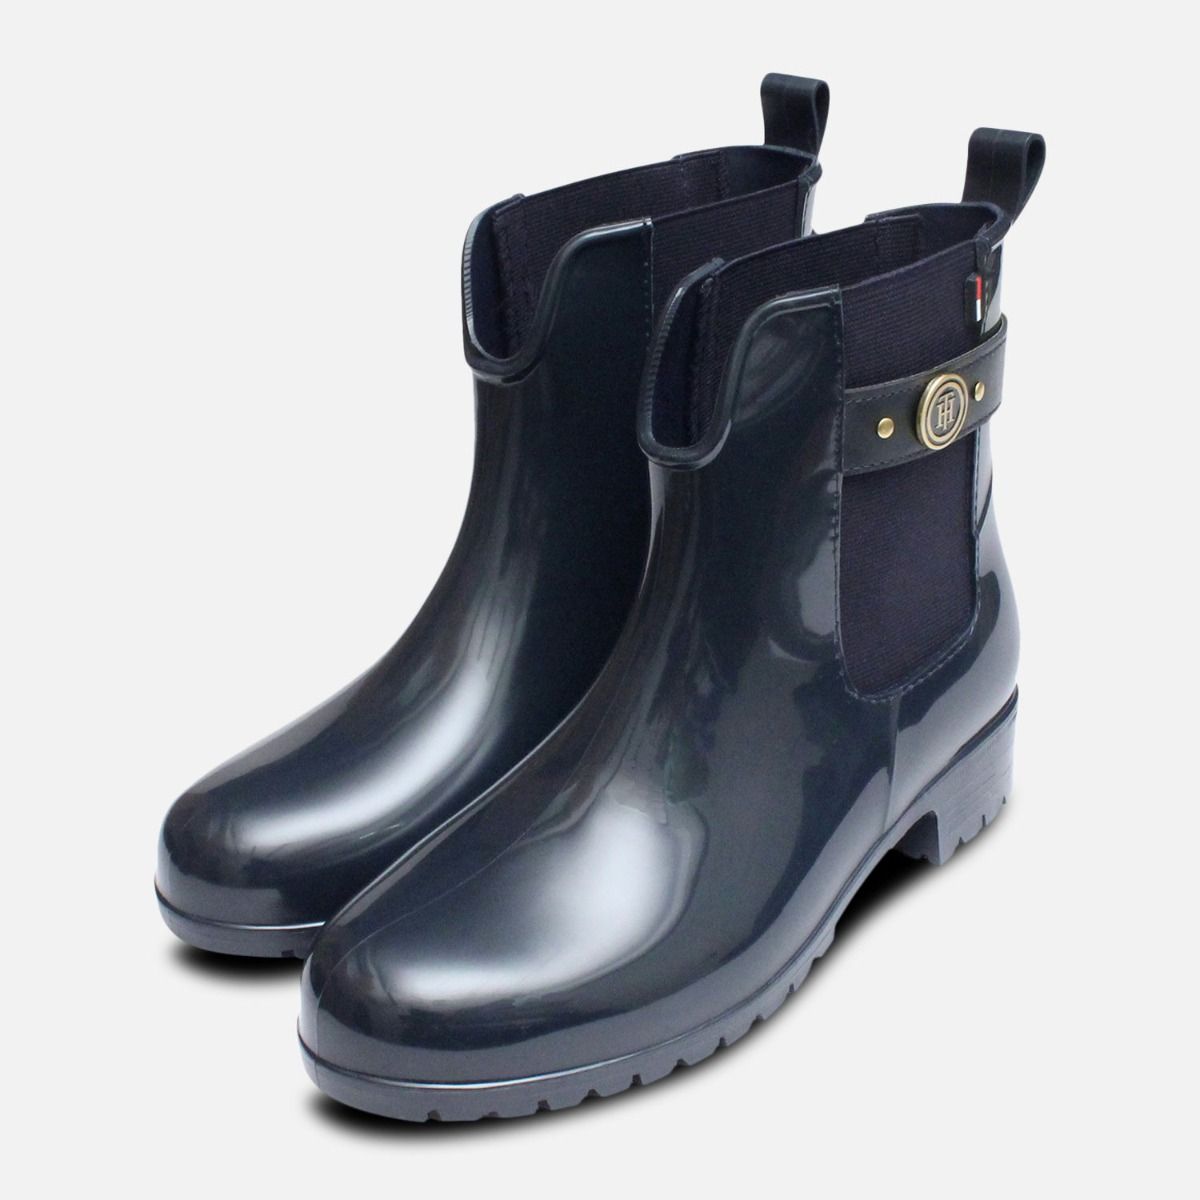 Oxley Tommy Hilfiger Ladies Rubber Wellies